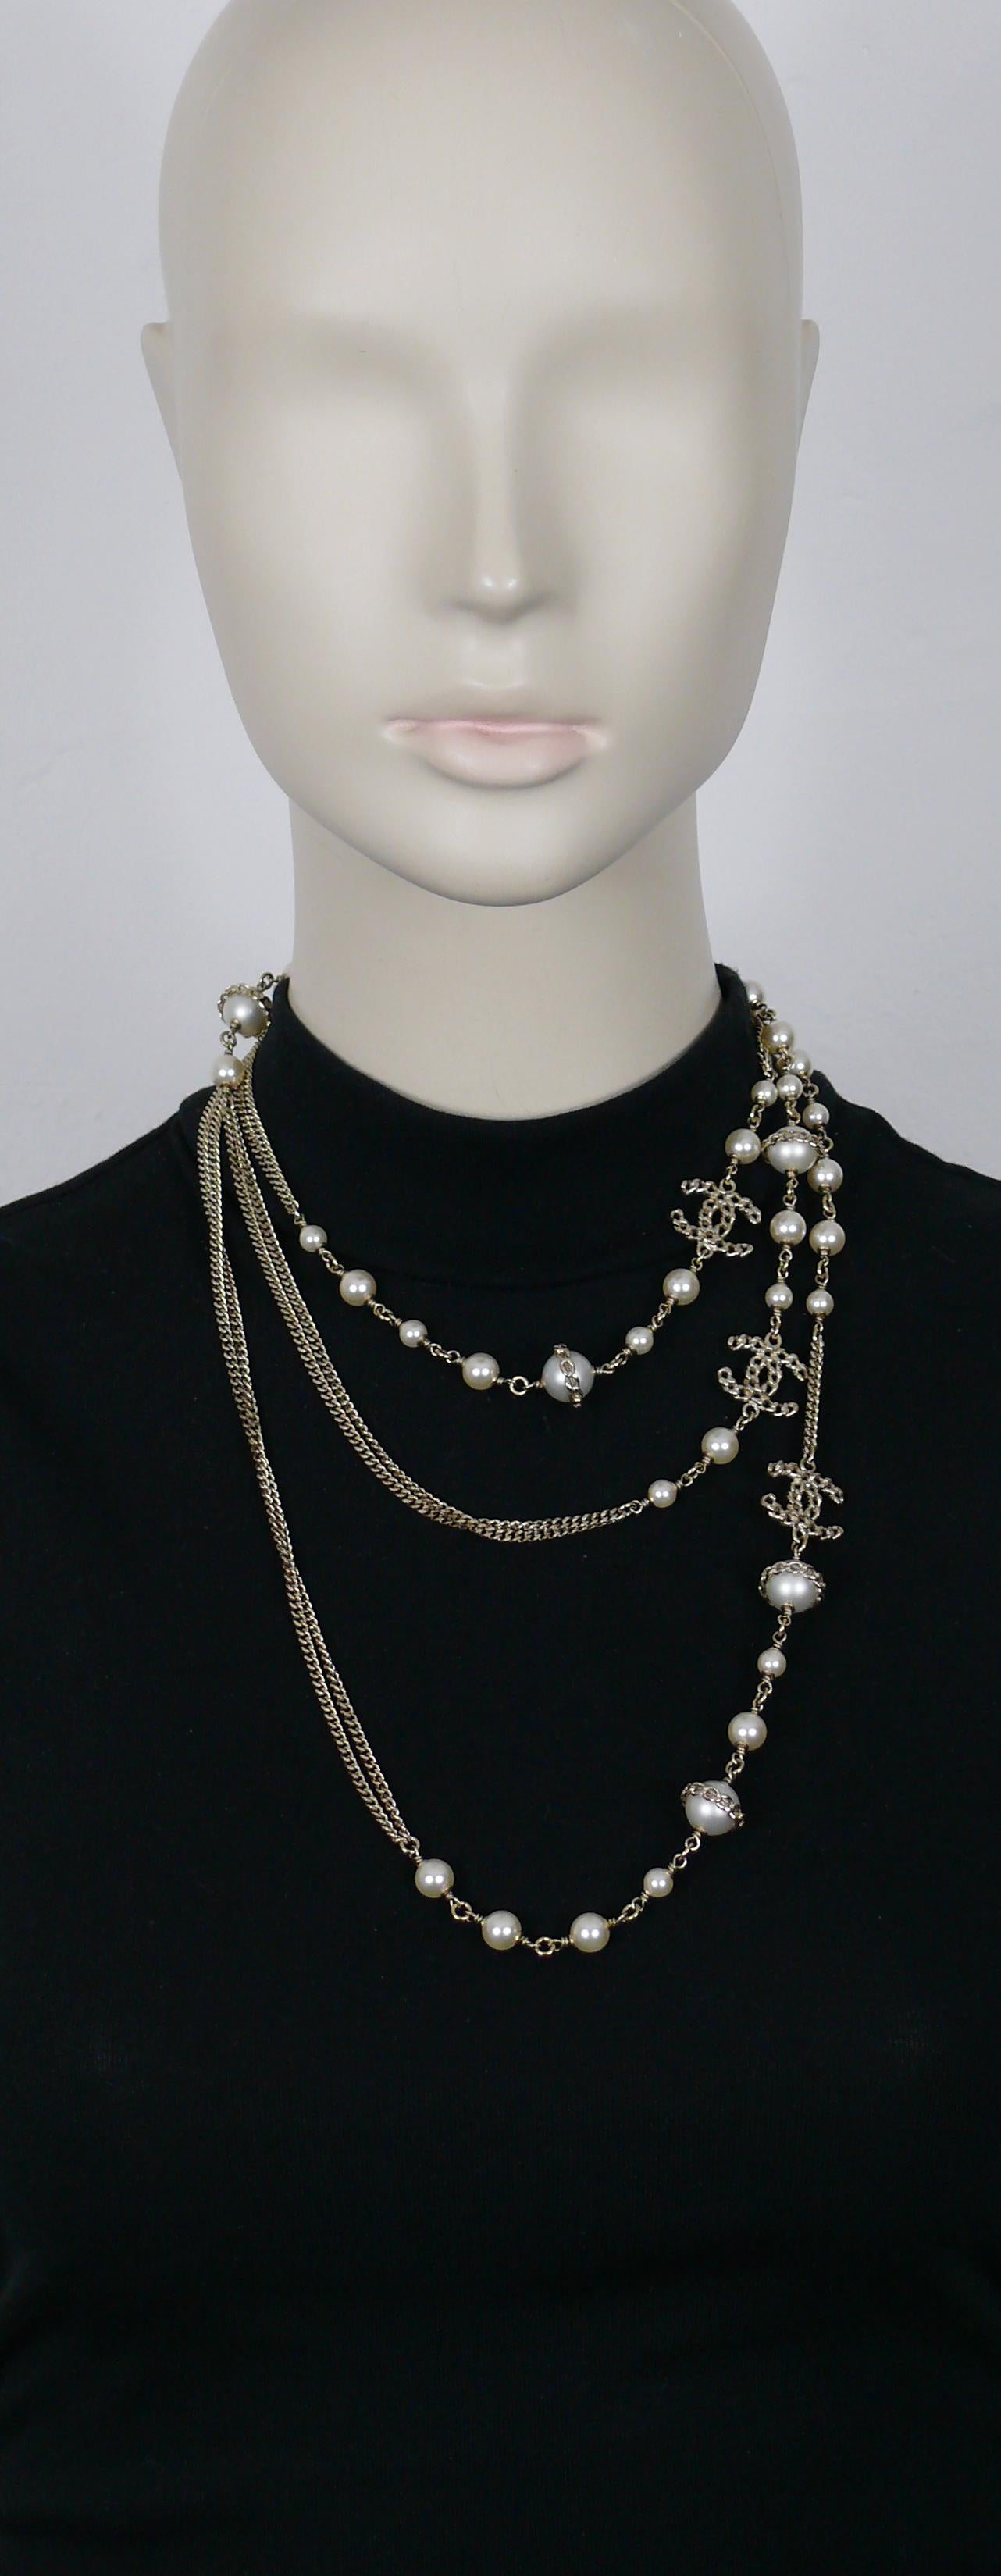 CHANEL by KARL LAGERFELD Chain CC Logos and Faux Pearl Sautoir Necklace, 2016 For Sale 2